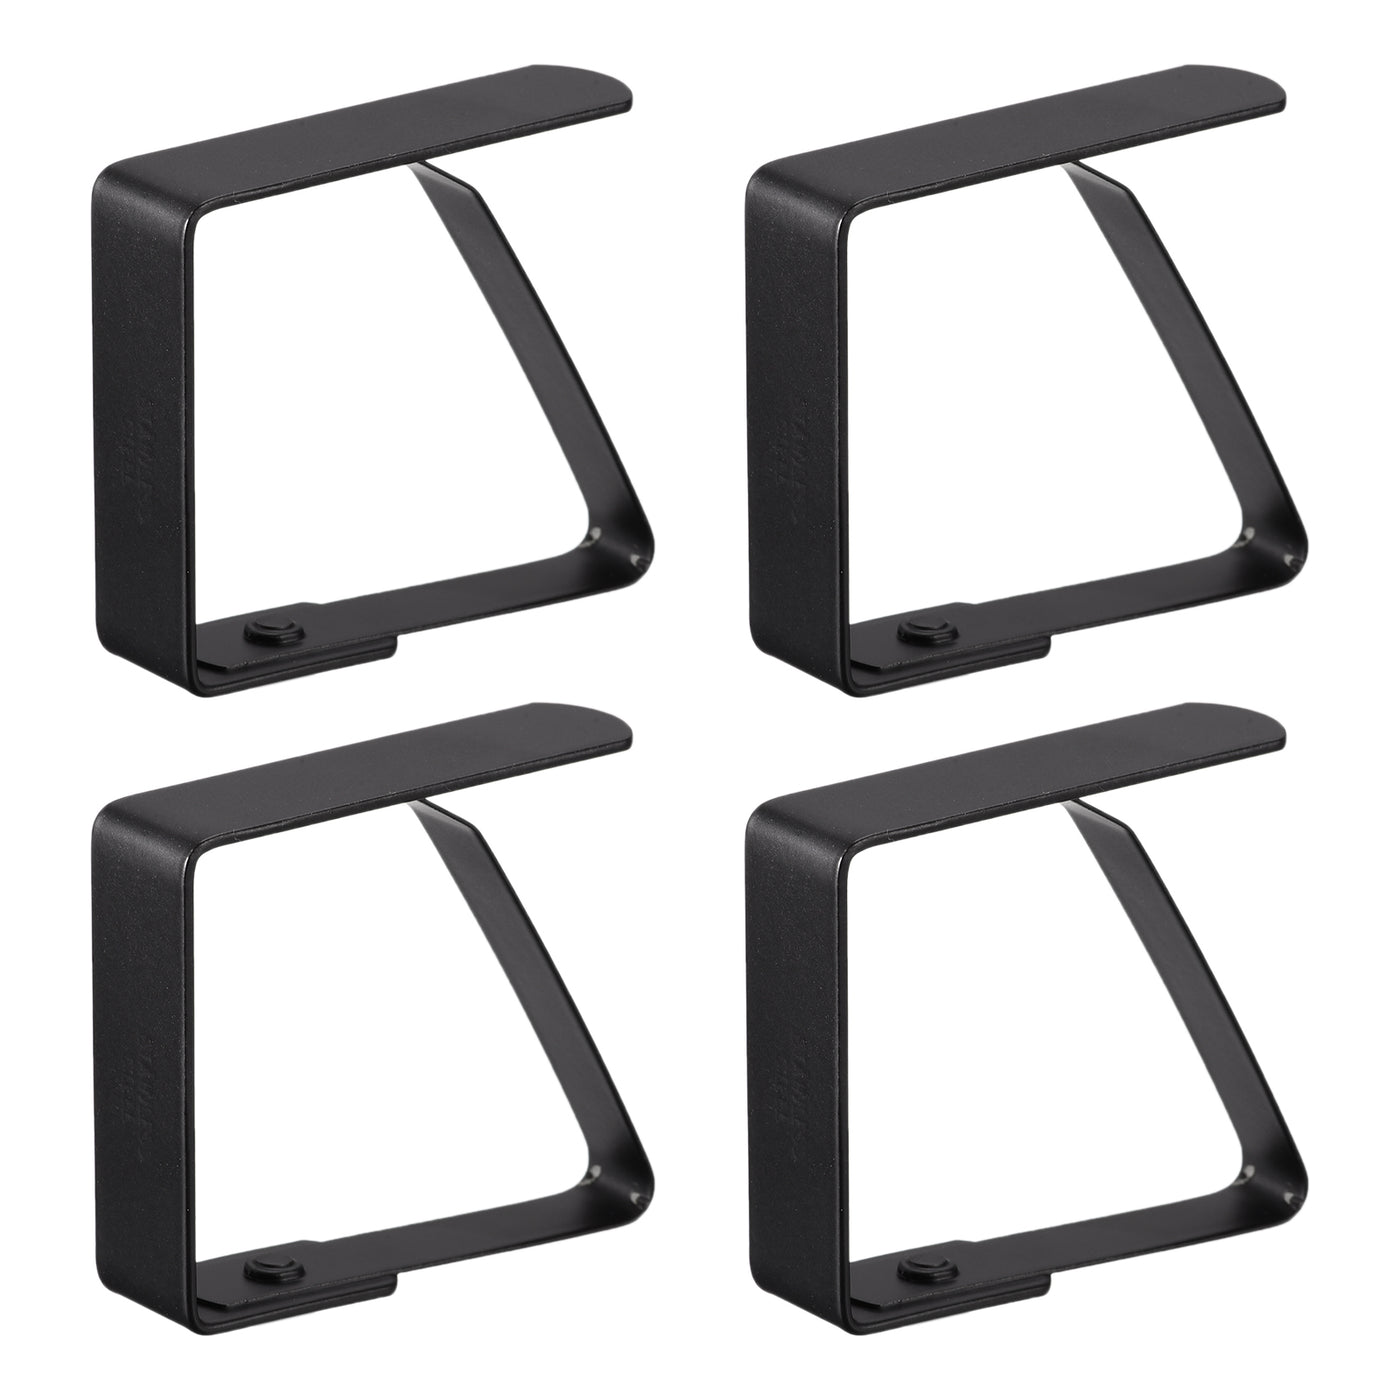 uxcell Uxcell Tablecloth Clips 50mm x 40mm 420 Stainless Steel Table Cloth Holder Black 4 Pcs